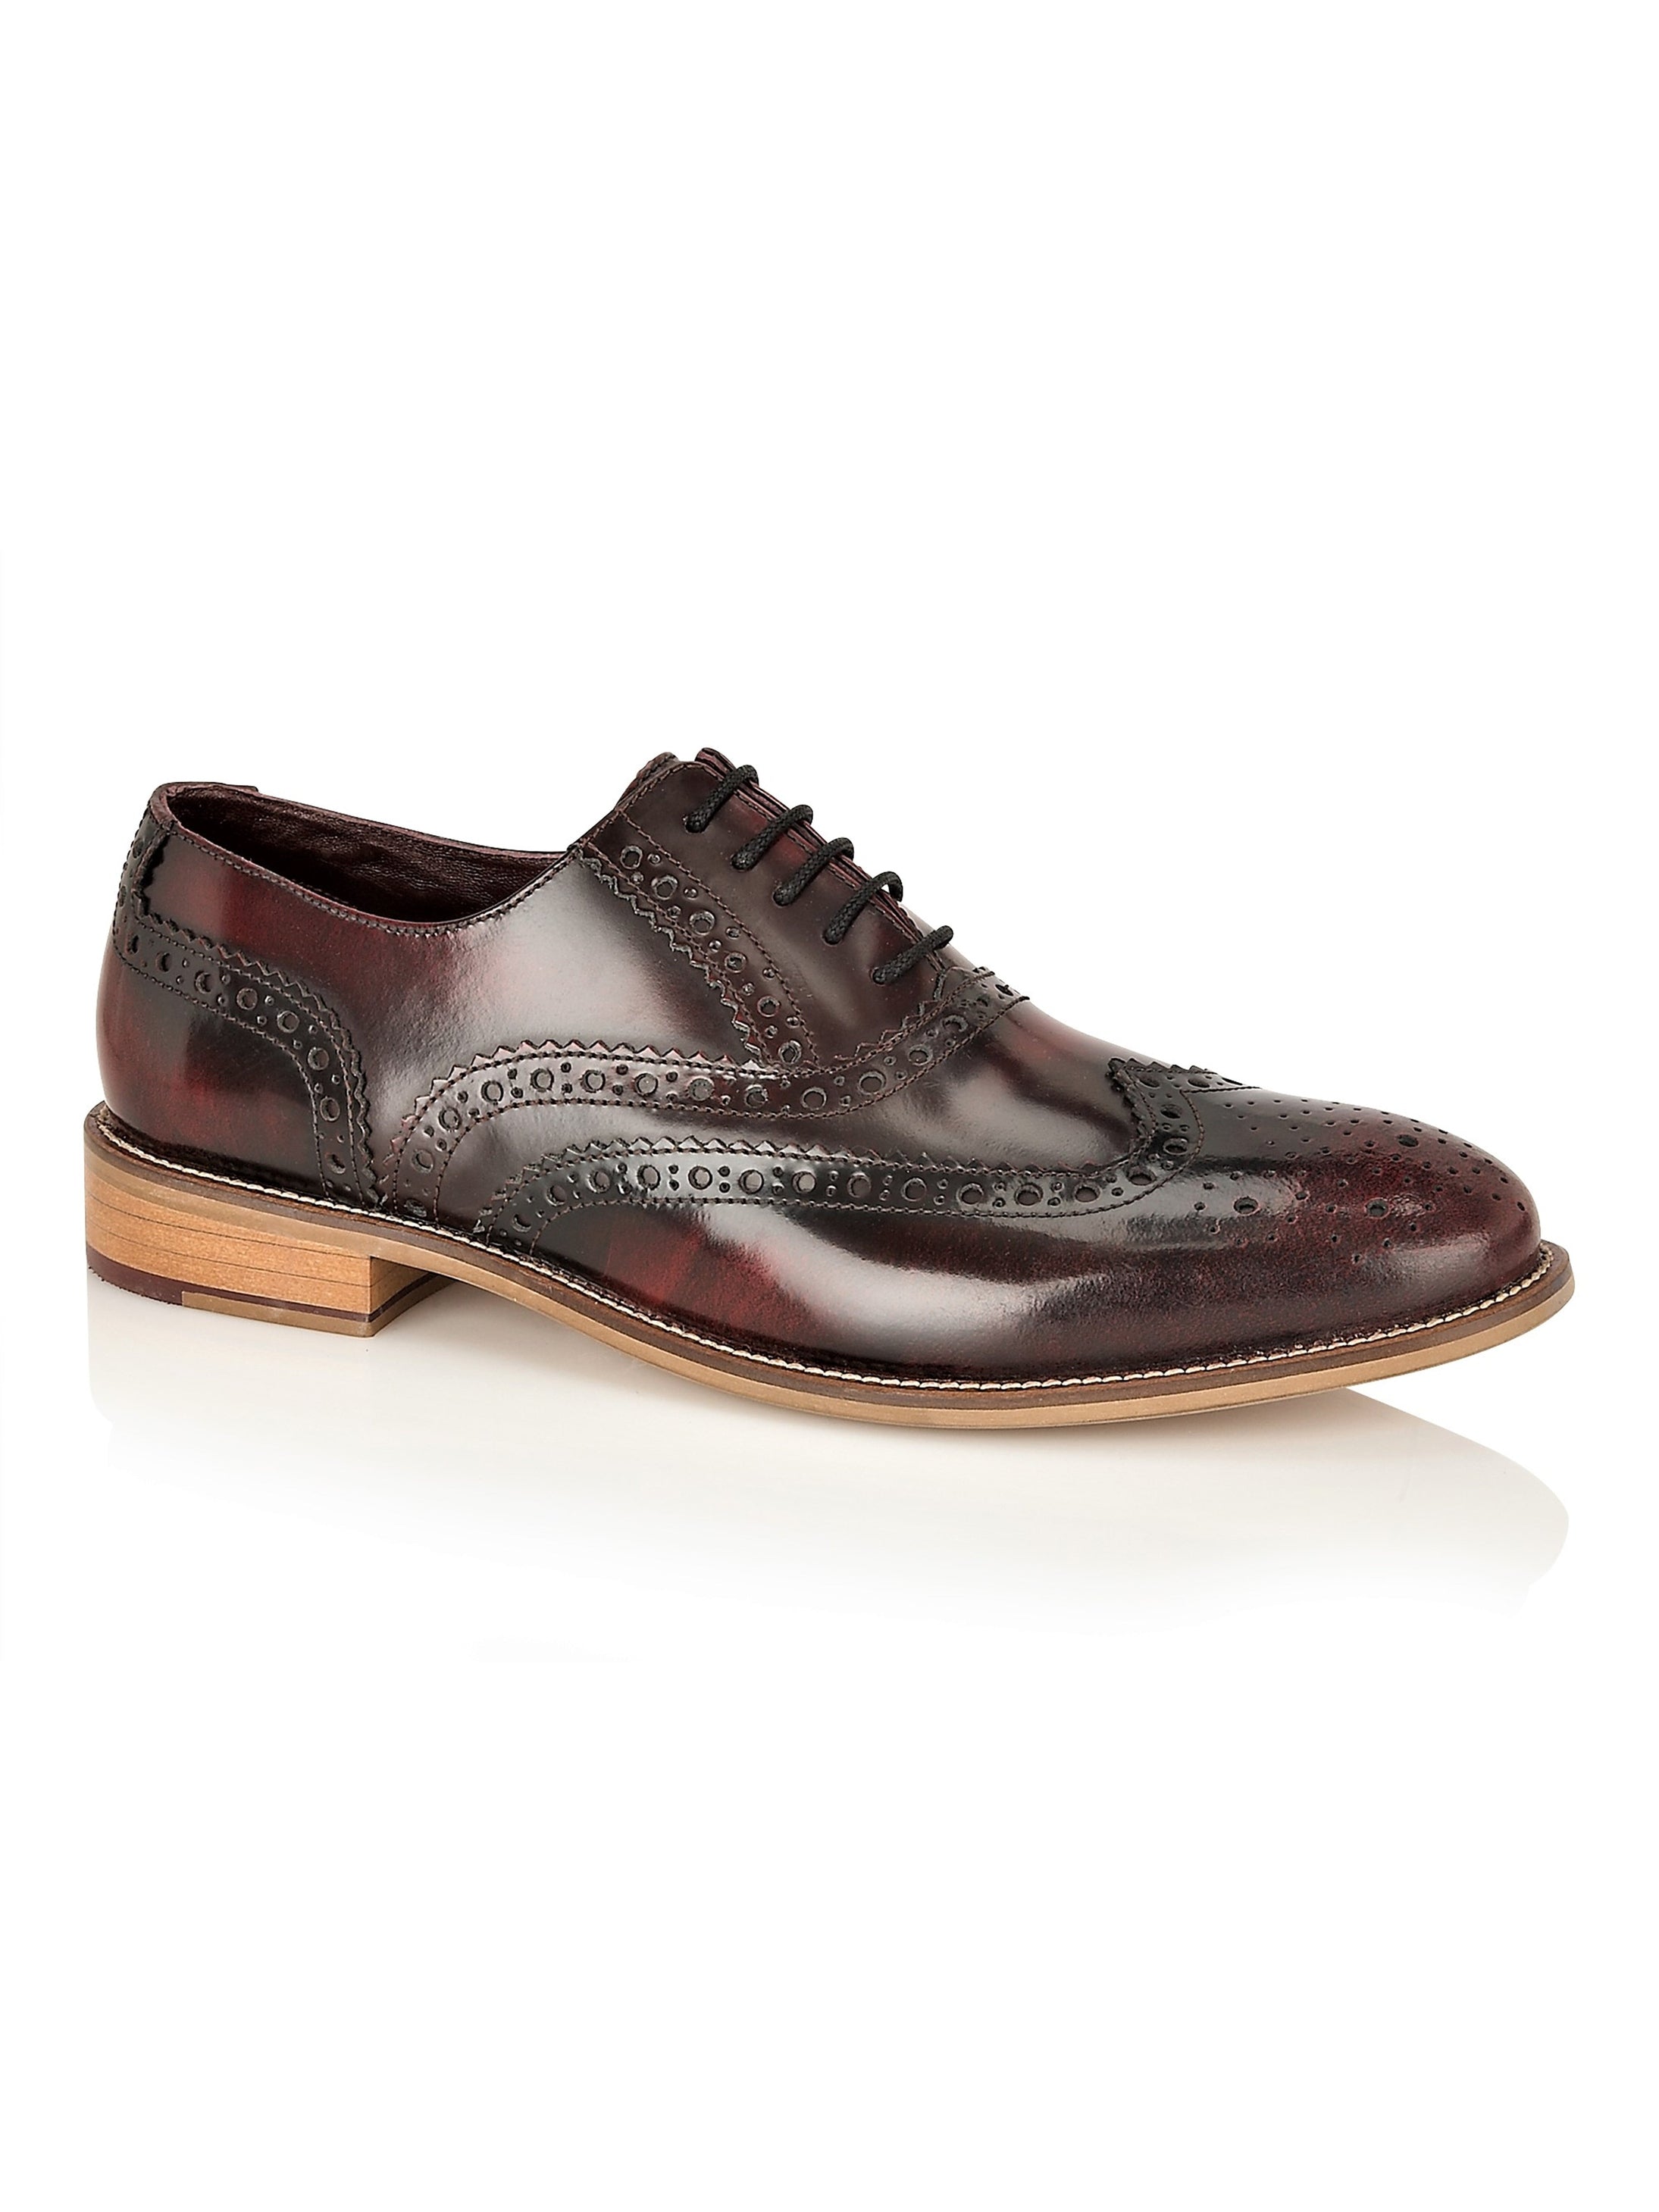 OXFORD BROGUES IN POLISHED MAROON